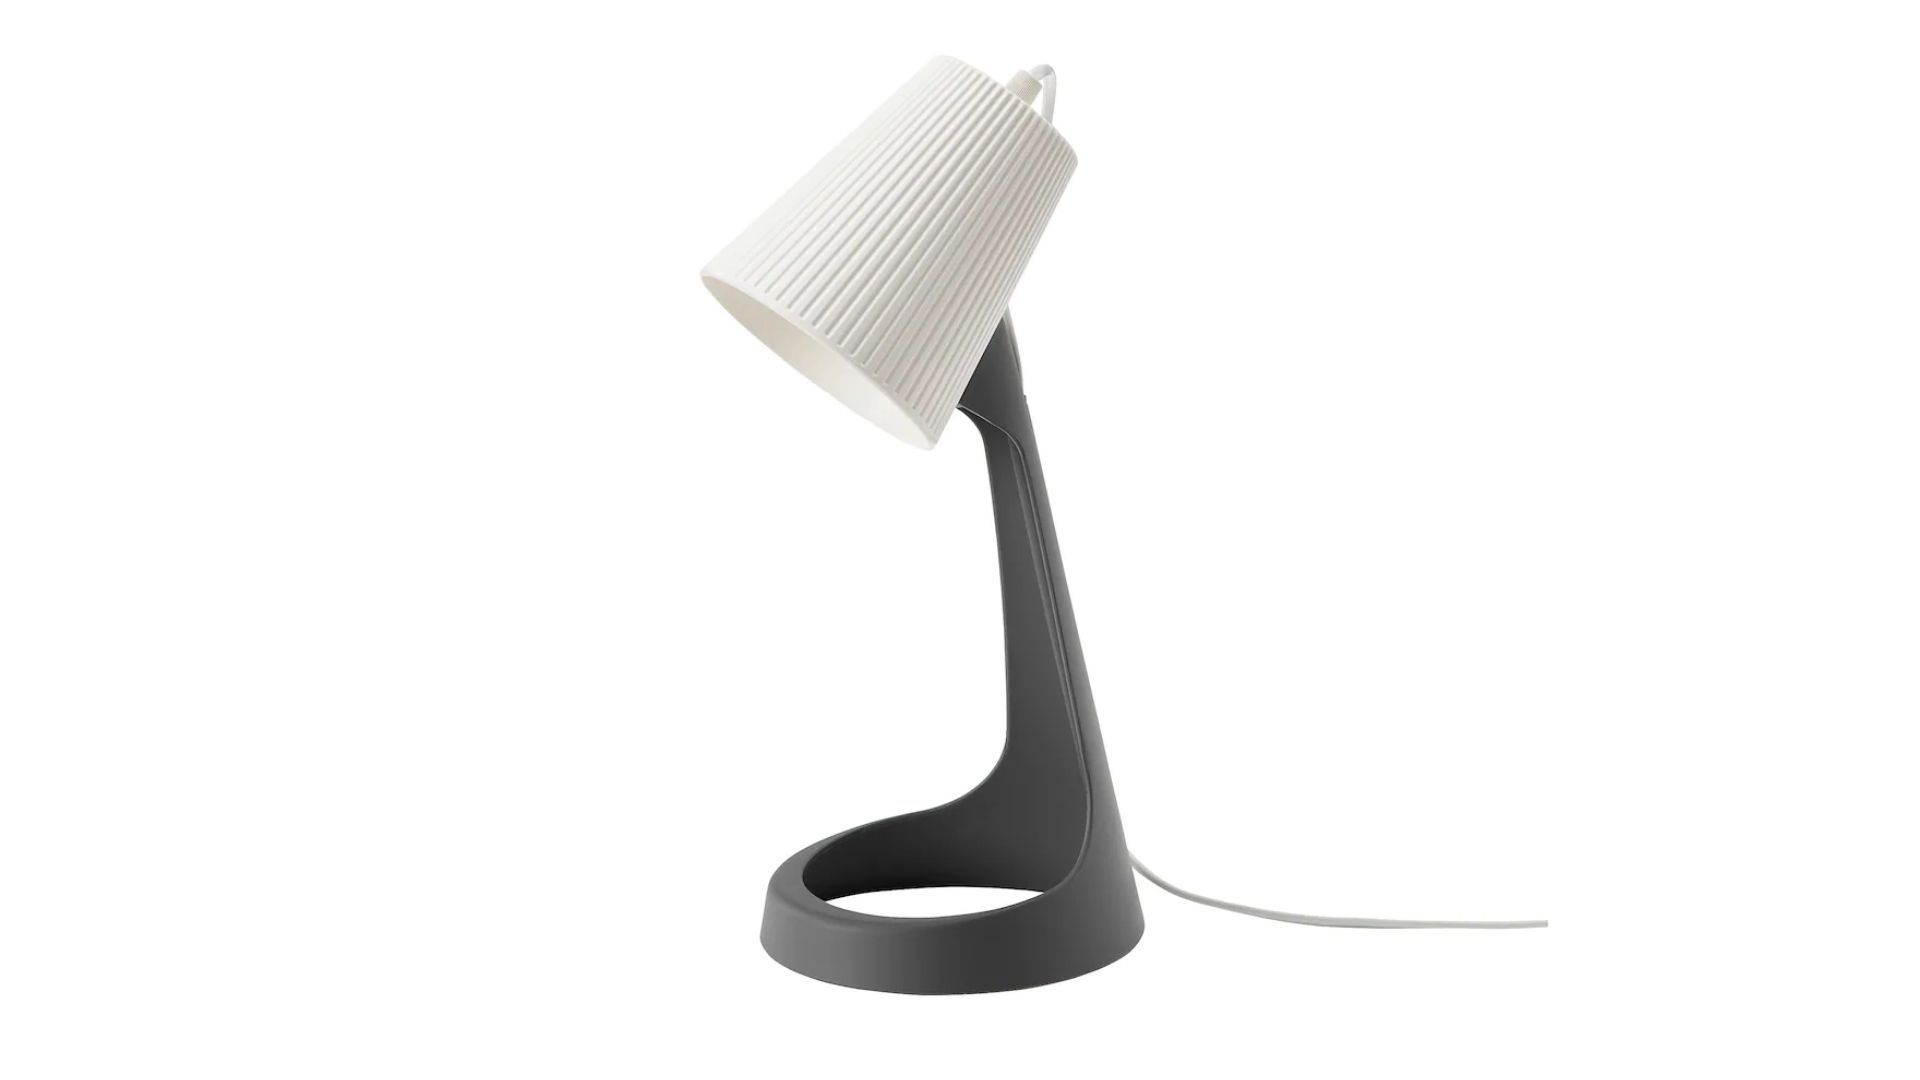 IKEA SVALLET Work lamp with LED bulb, dark gray and white colors